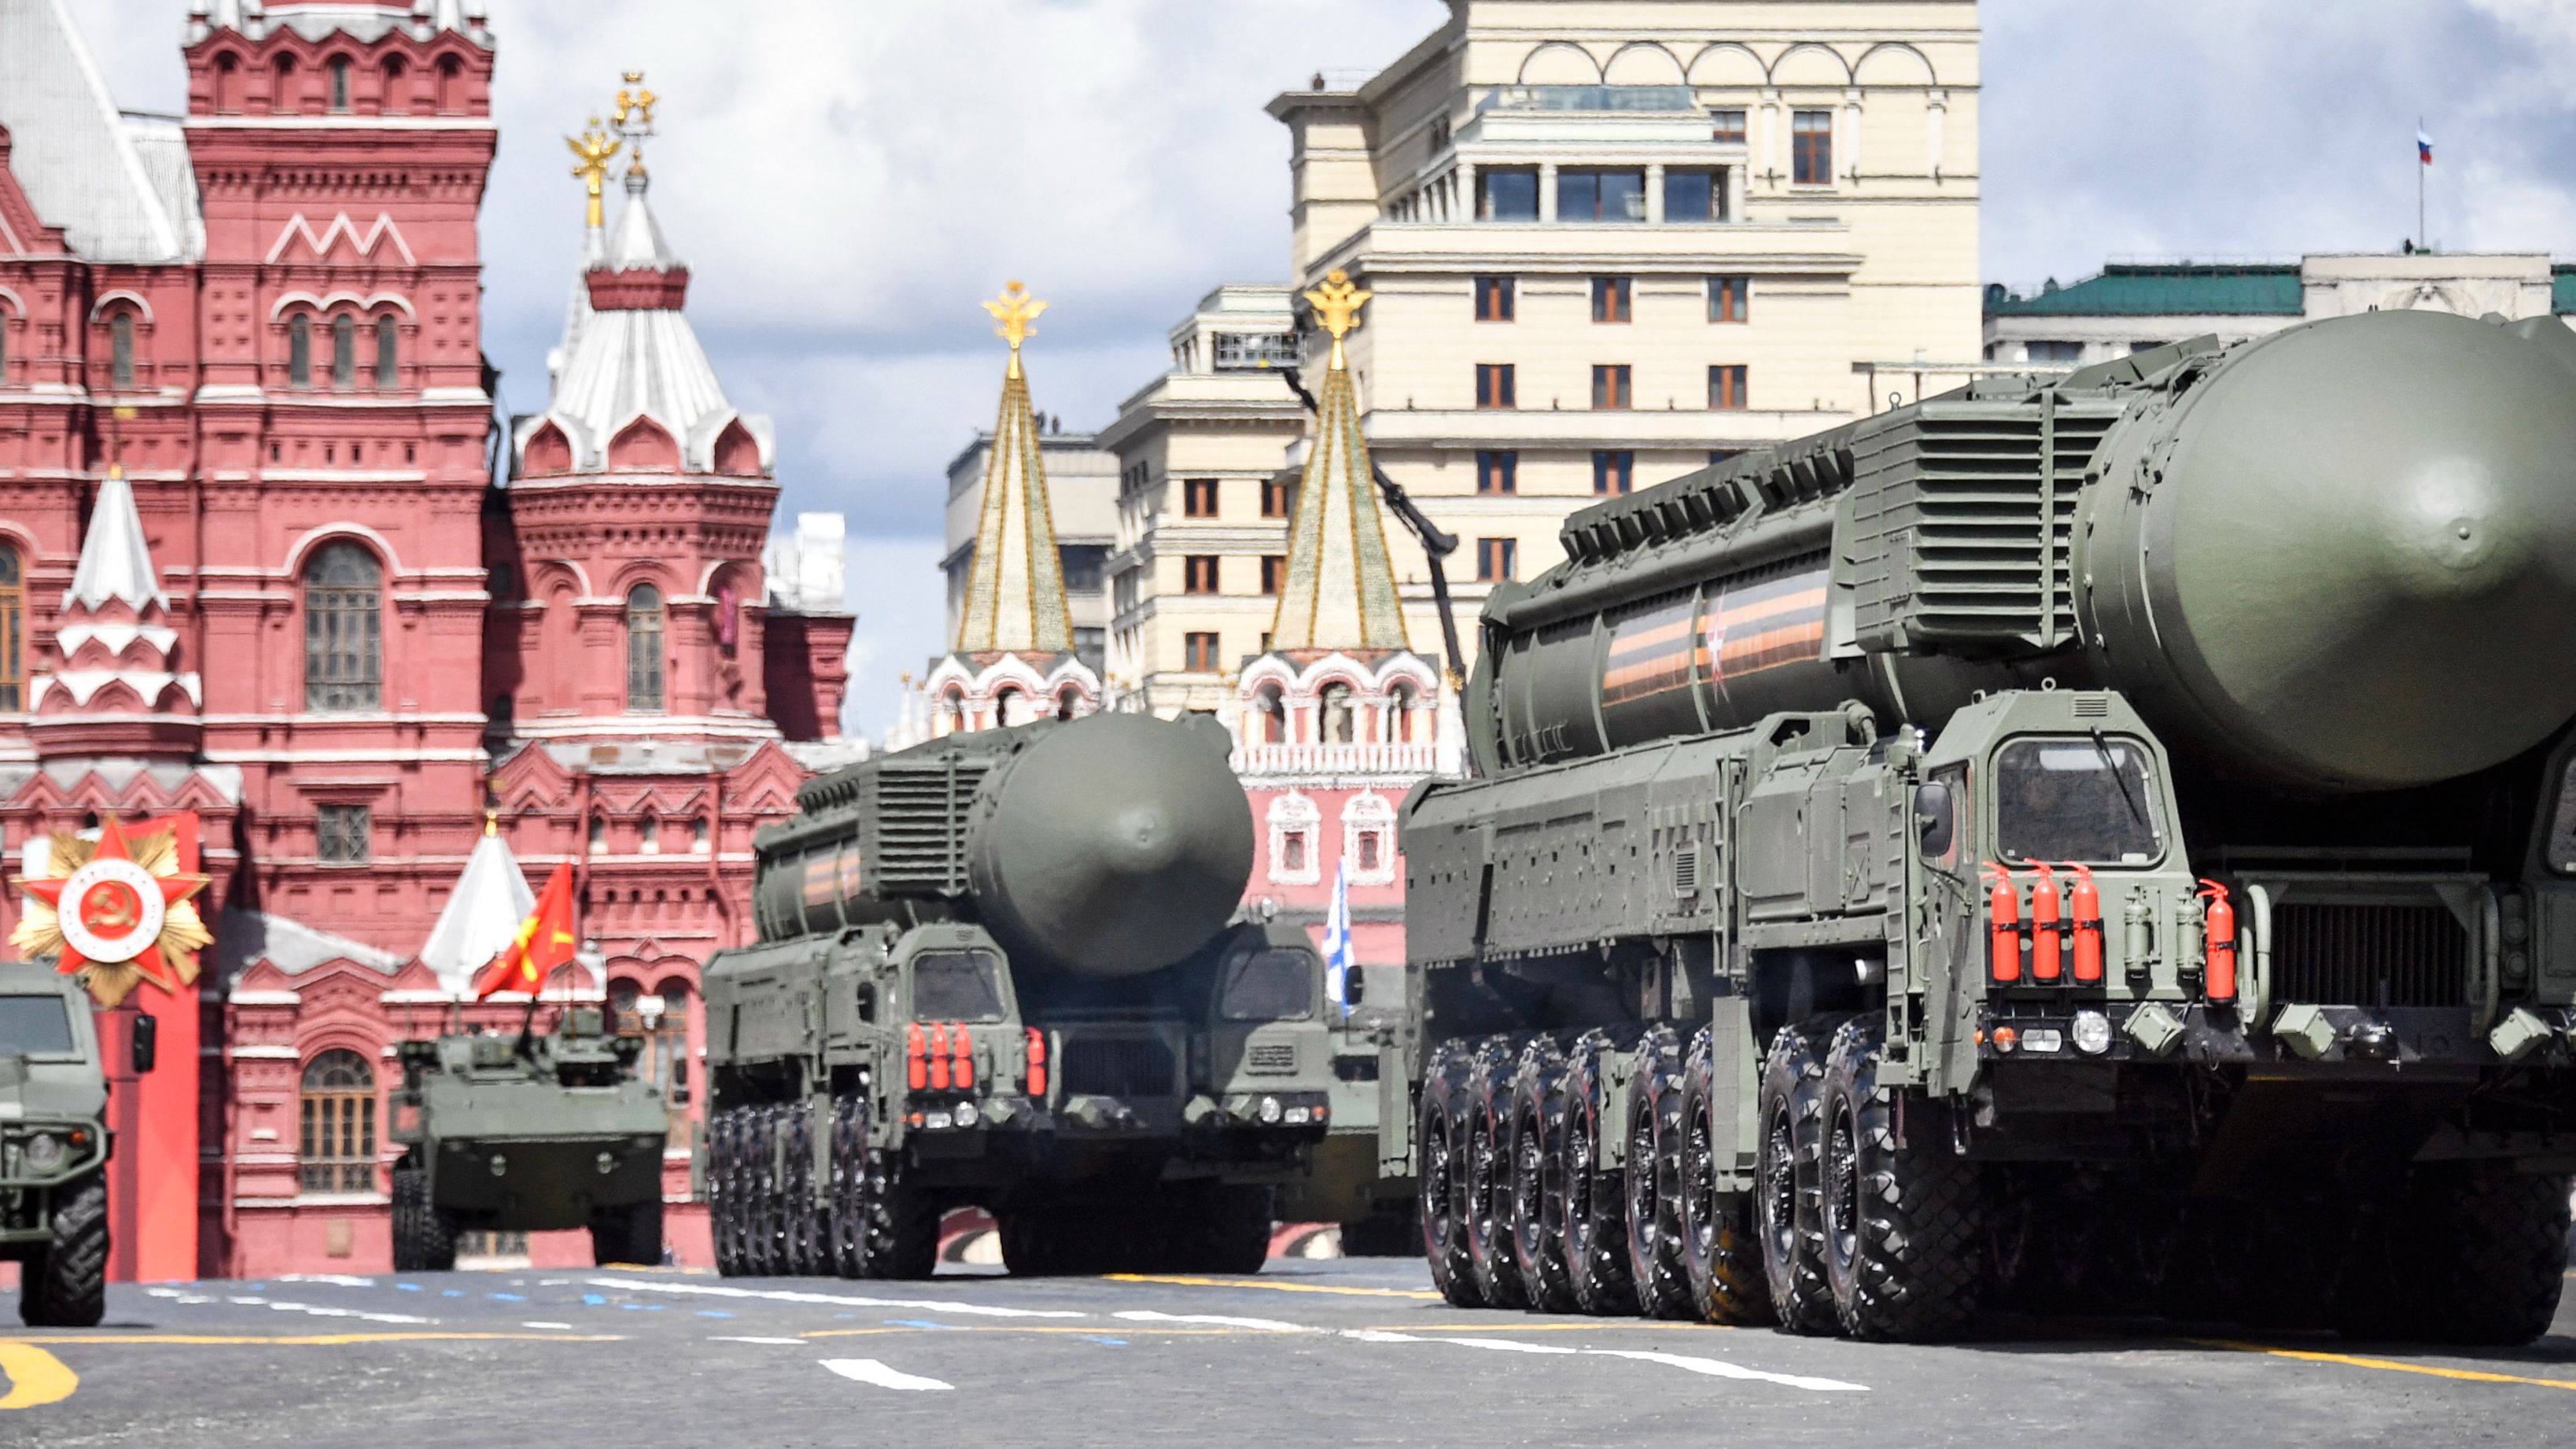 Some of Russia's nuclear missile stock could soon be in Belarus. /Kirill Kudryavtsev/AFP